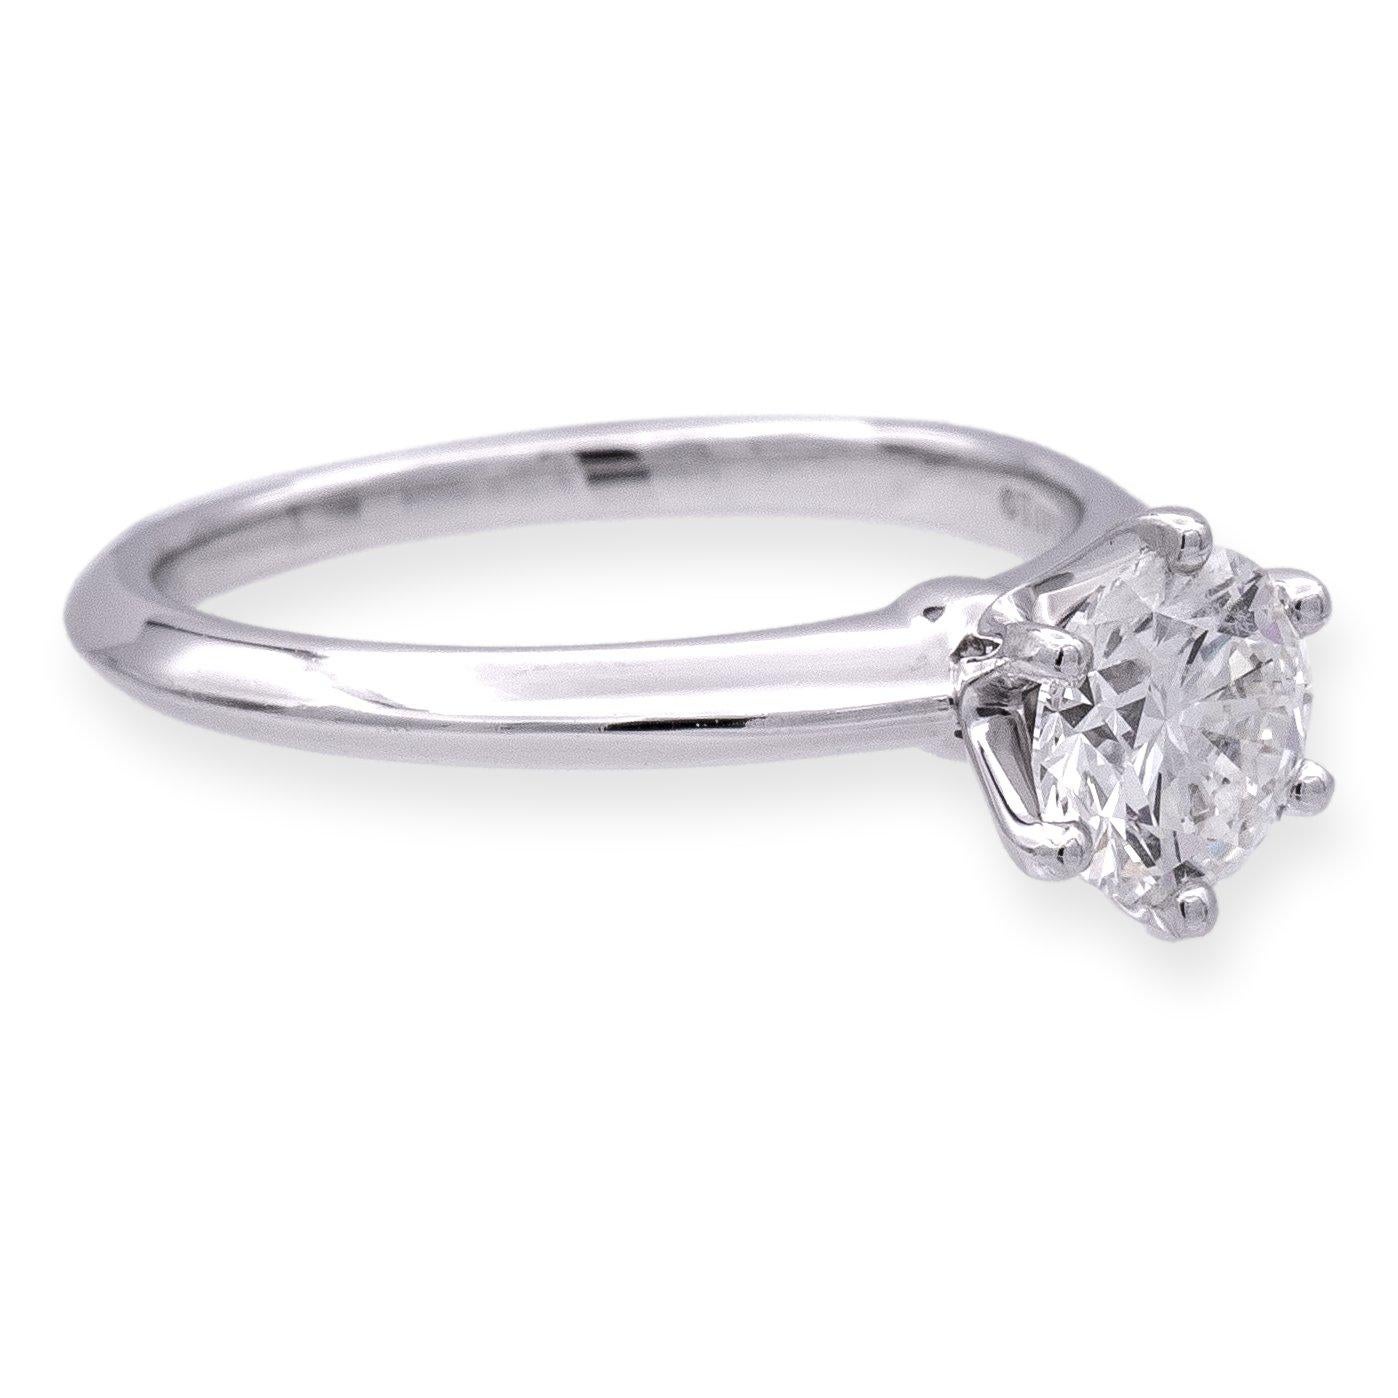 Tiffany & Co. Solitaire diamond engagement ring finely crafted in a six prong platinum mounting featuring a 1.03 carat round brilliant diamond center graded H color and VS1 Clarity. The diamond is inscribed with Tiffanys serial numbers and is